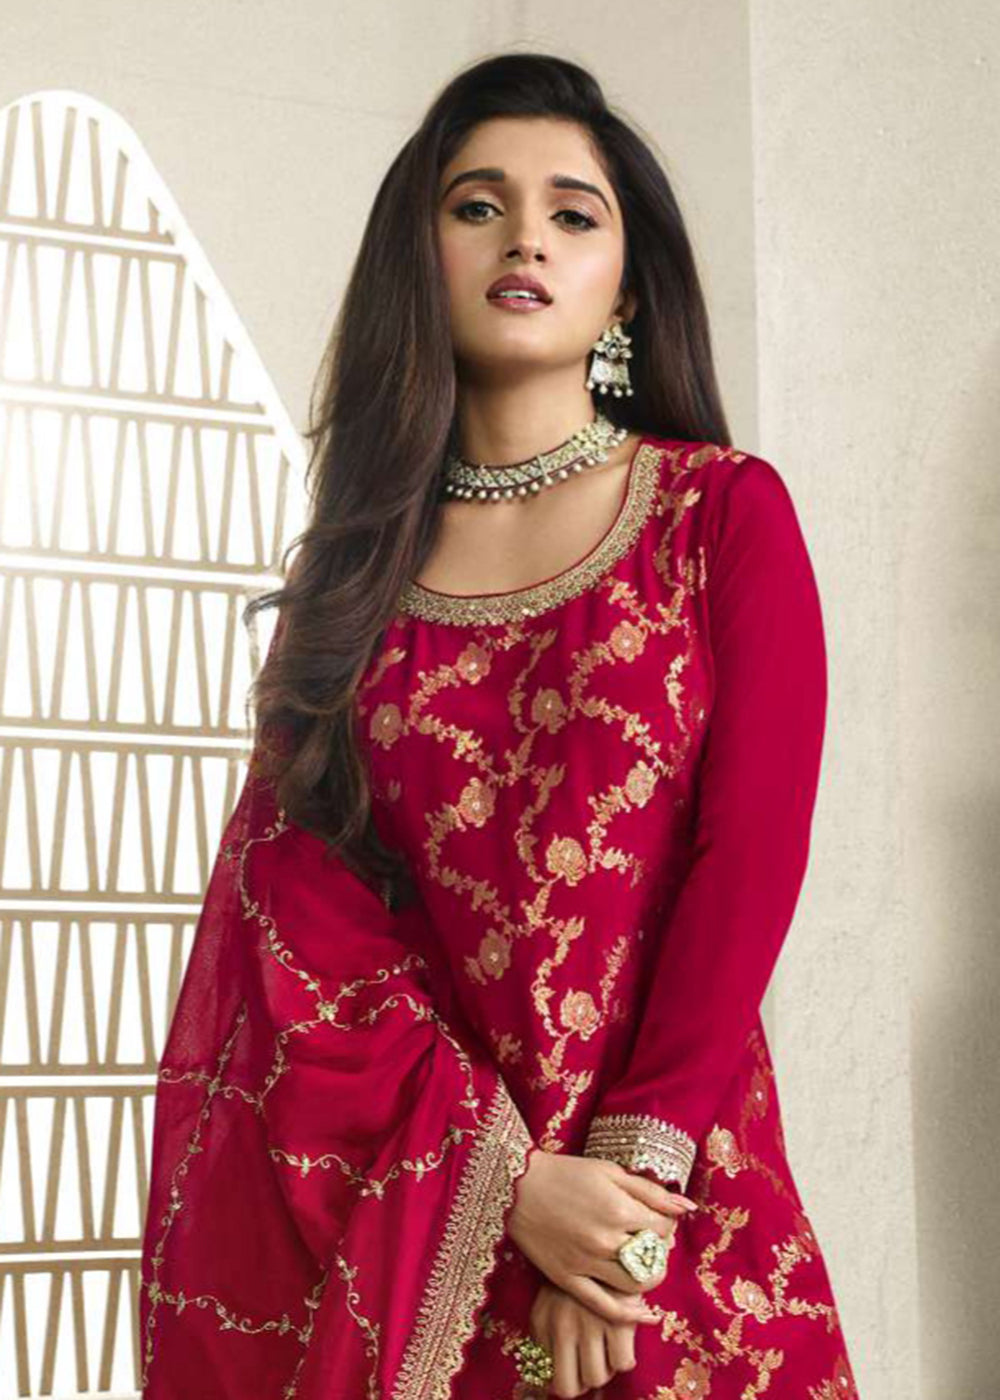 Buy Now Chinnon Jacquard Red Zari Embroidered Palazzo Suit Online in USA, UK, Canada, Germany, Australia & Worldwide at Empress Clothing.